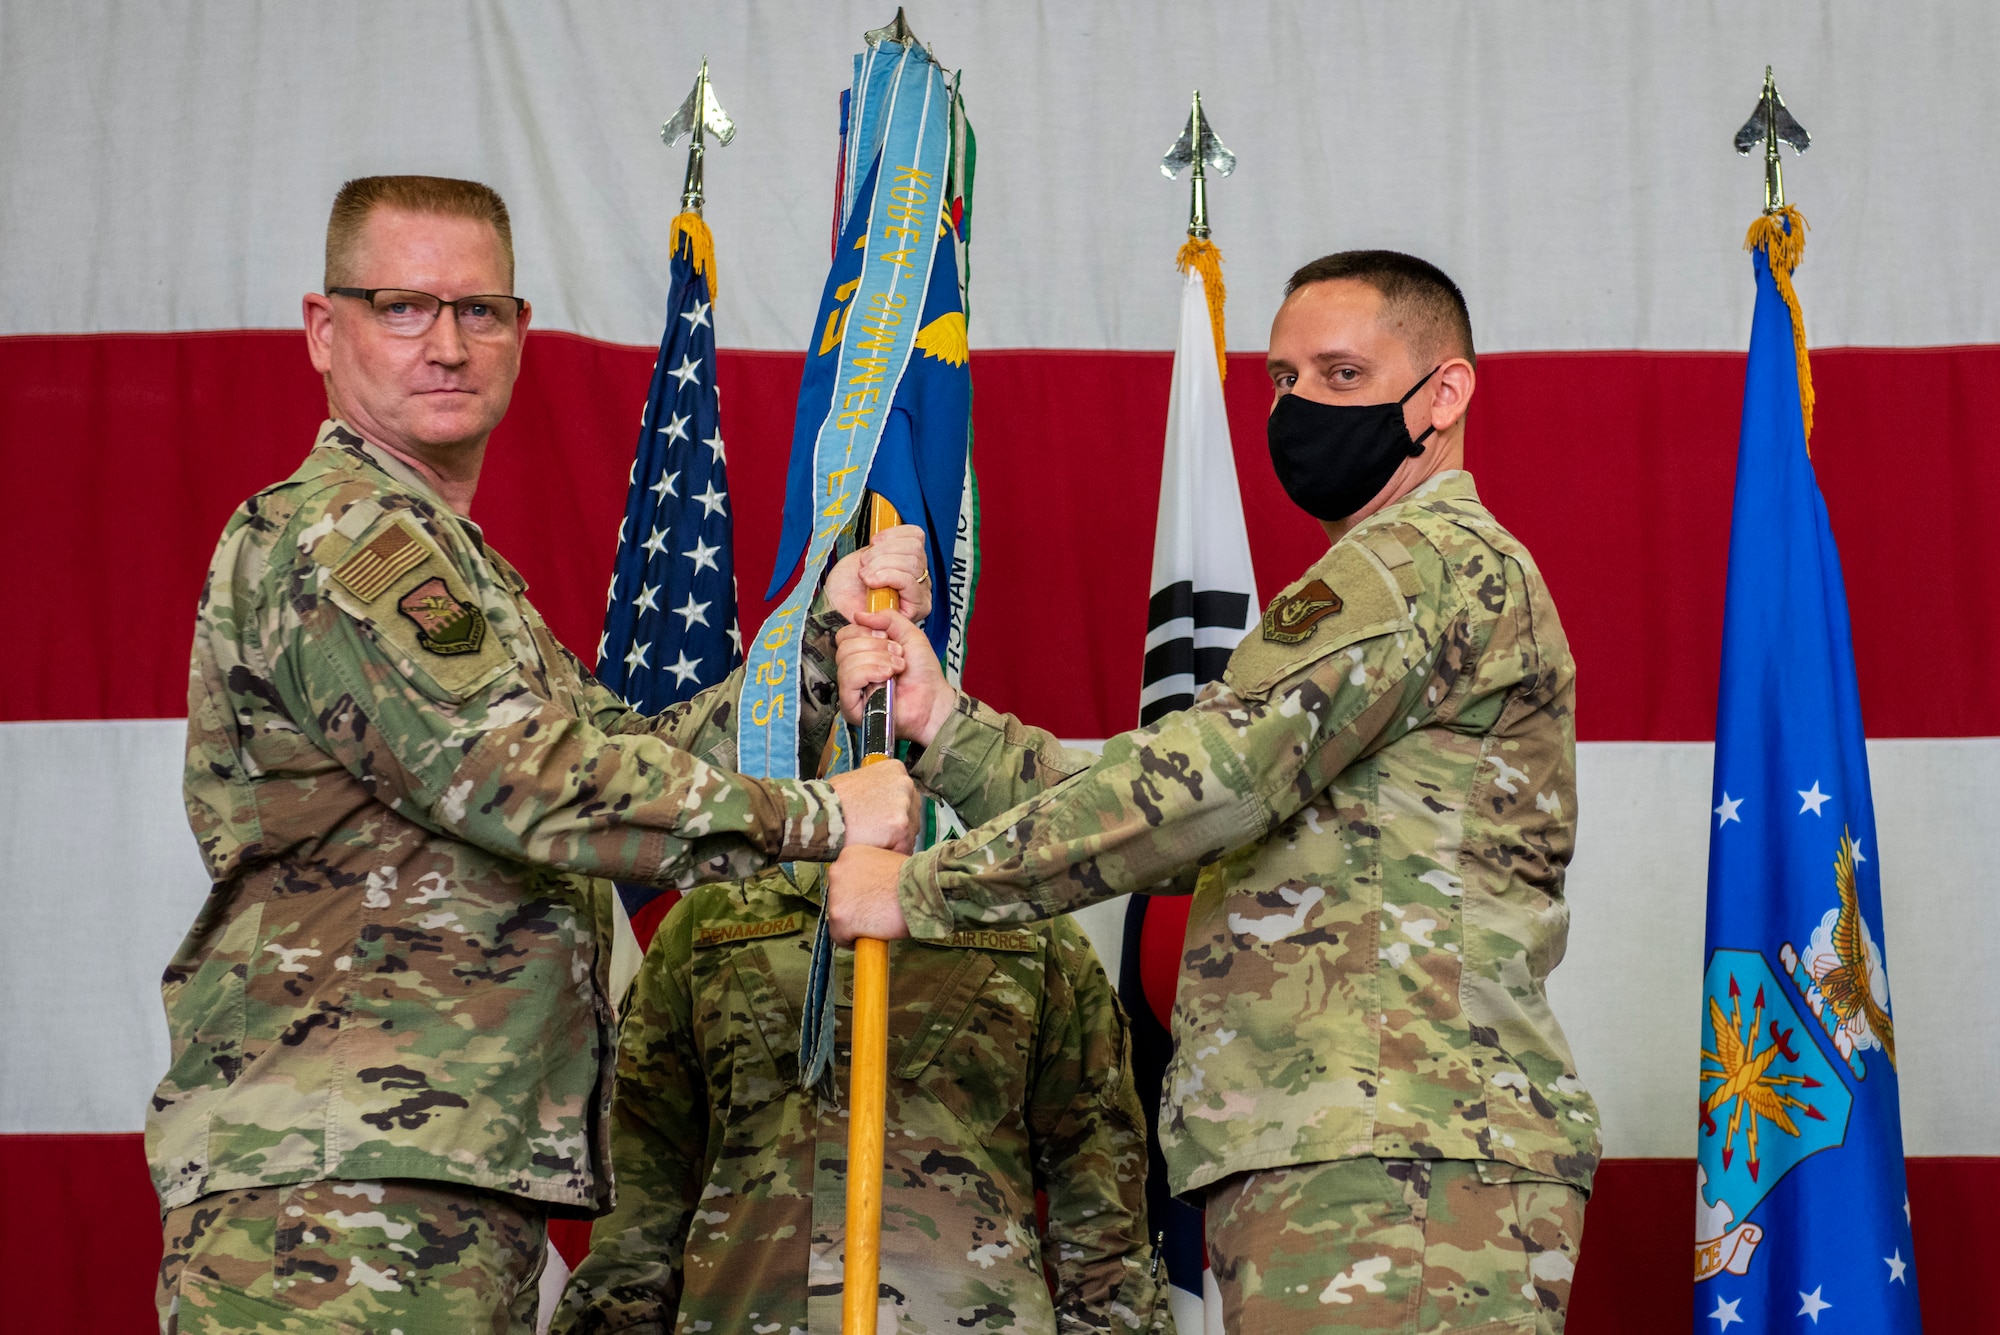 51st Maintenance Squadron held a change of command ceremony at Osan Air Base, Republic of Korea, June 18, 2021. Lt. Col. Robert Campbell transferred command of the 51st MXS to Maj. Benjamin Abshire.